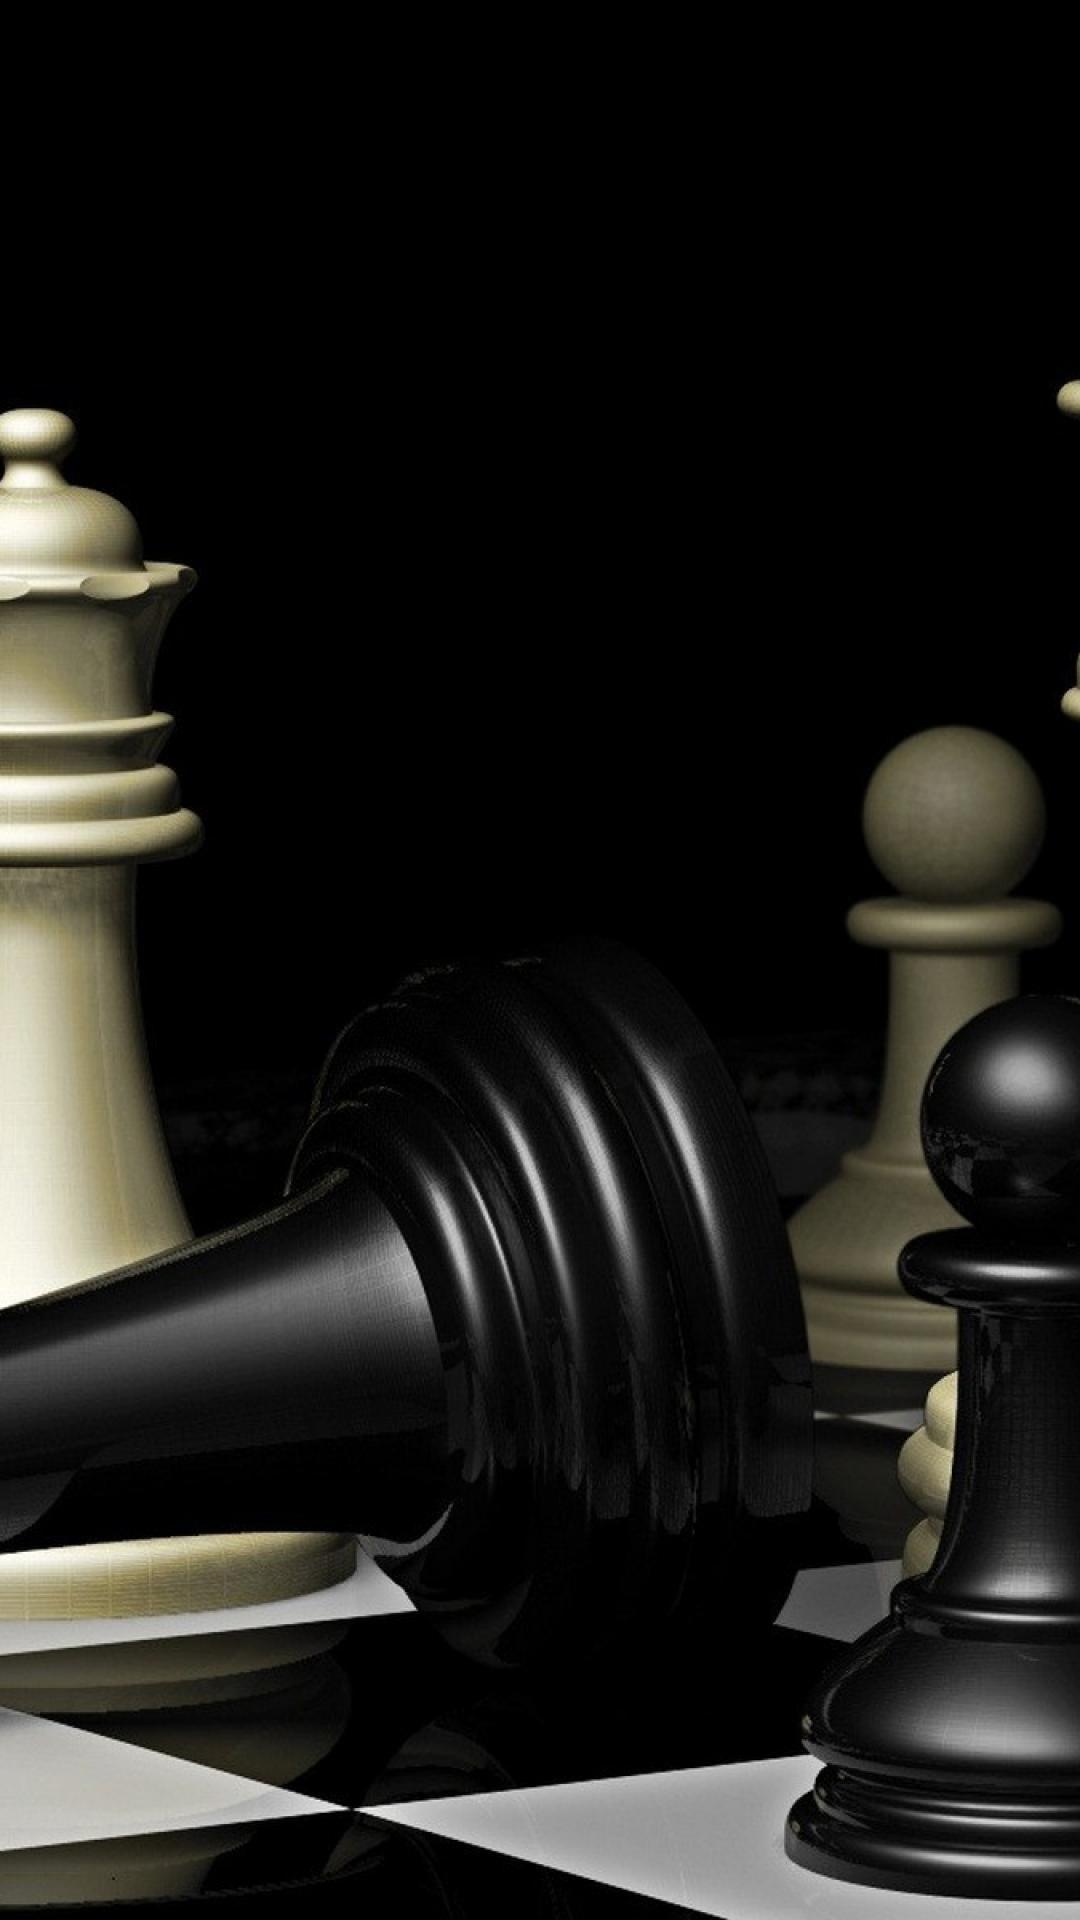 Chess Wallpaper for iPhone 11, Pro Max, X, 8, 7, 6 - Free Download on  3Wallpapers